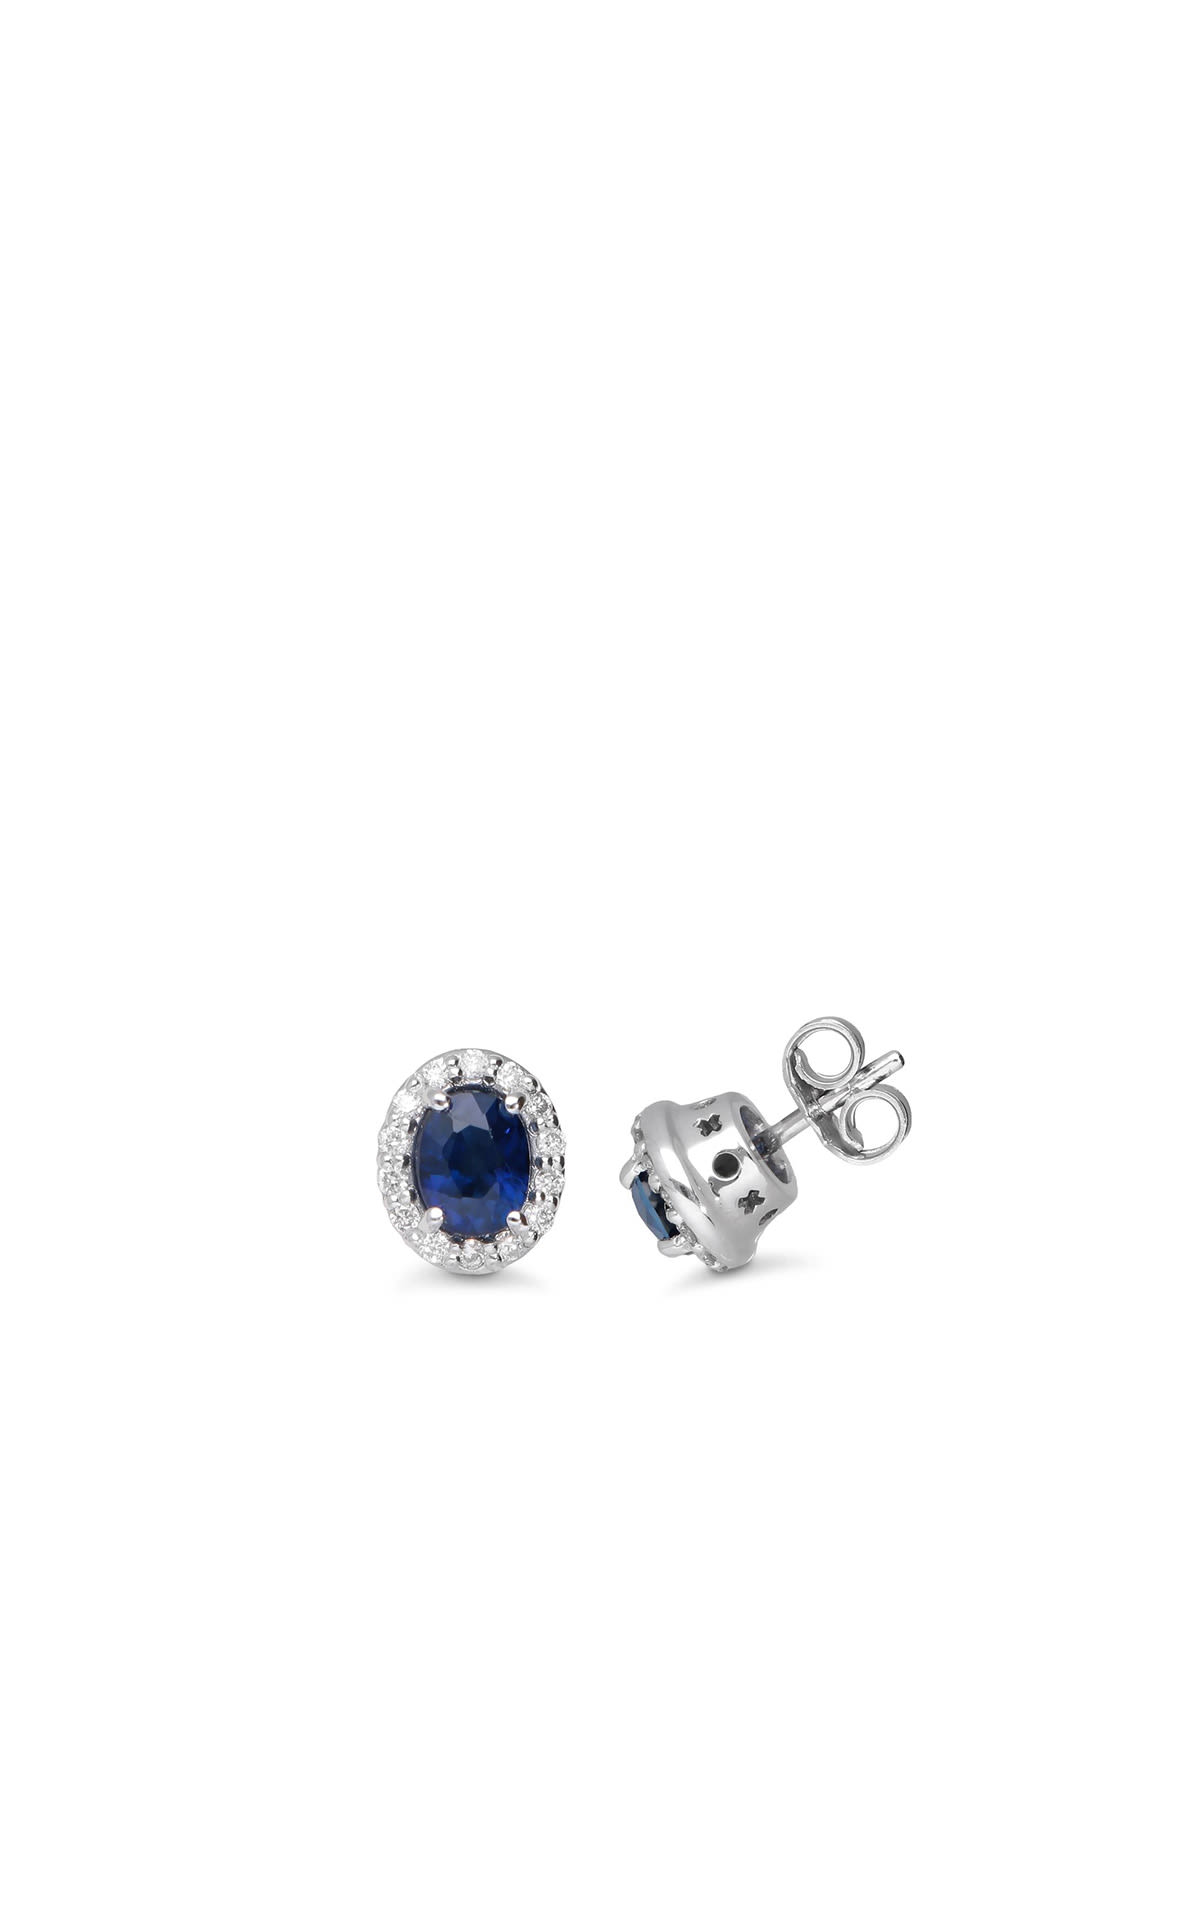 Luxury Zone stud earrings in white gold with diamonds and sapphires